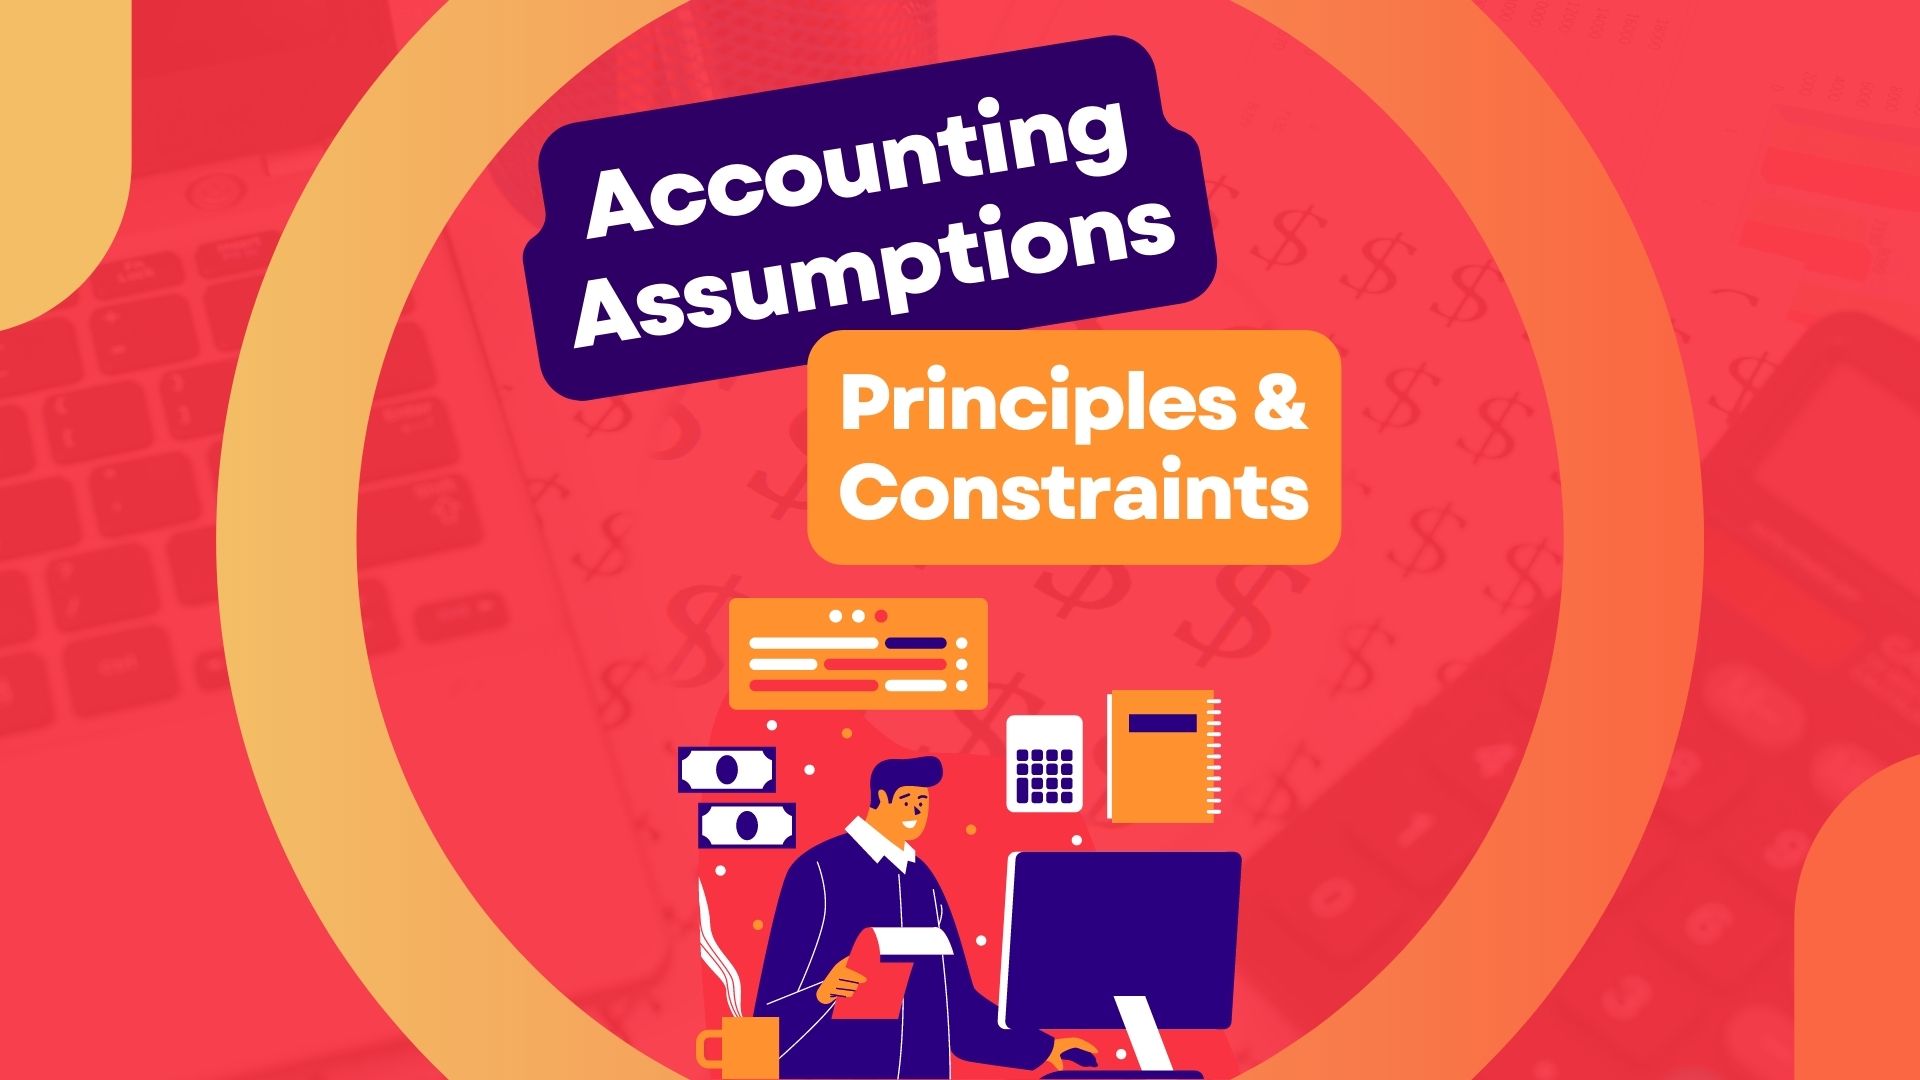 Accounting Assumptions, Principles & Constrains Course Image